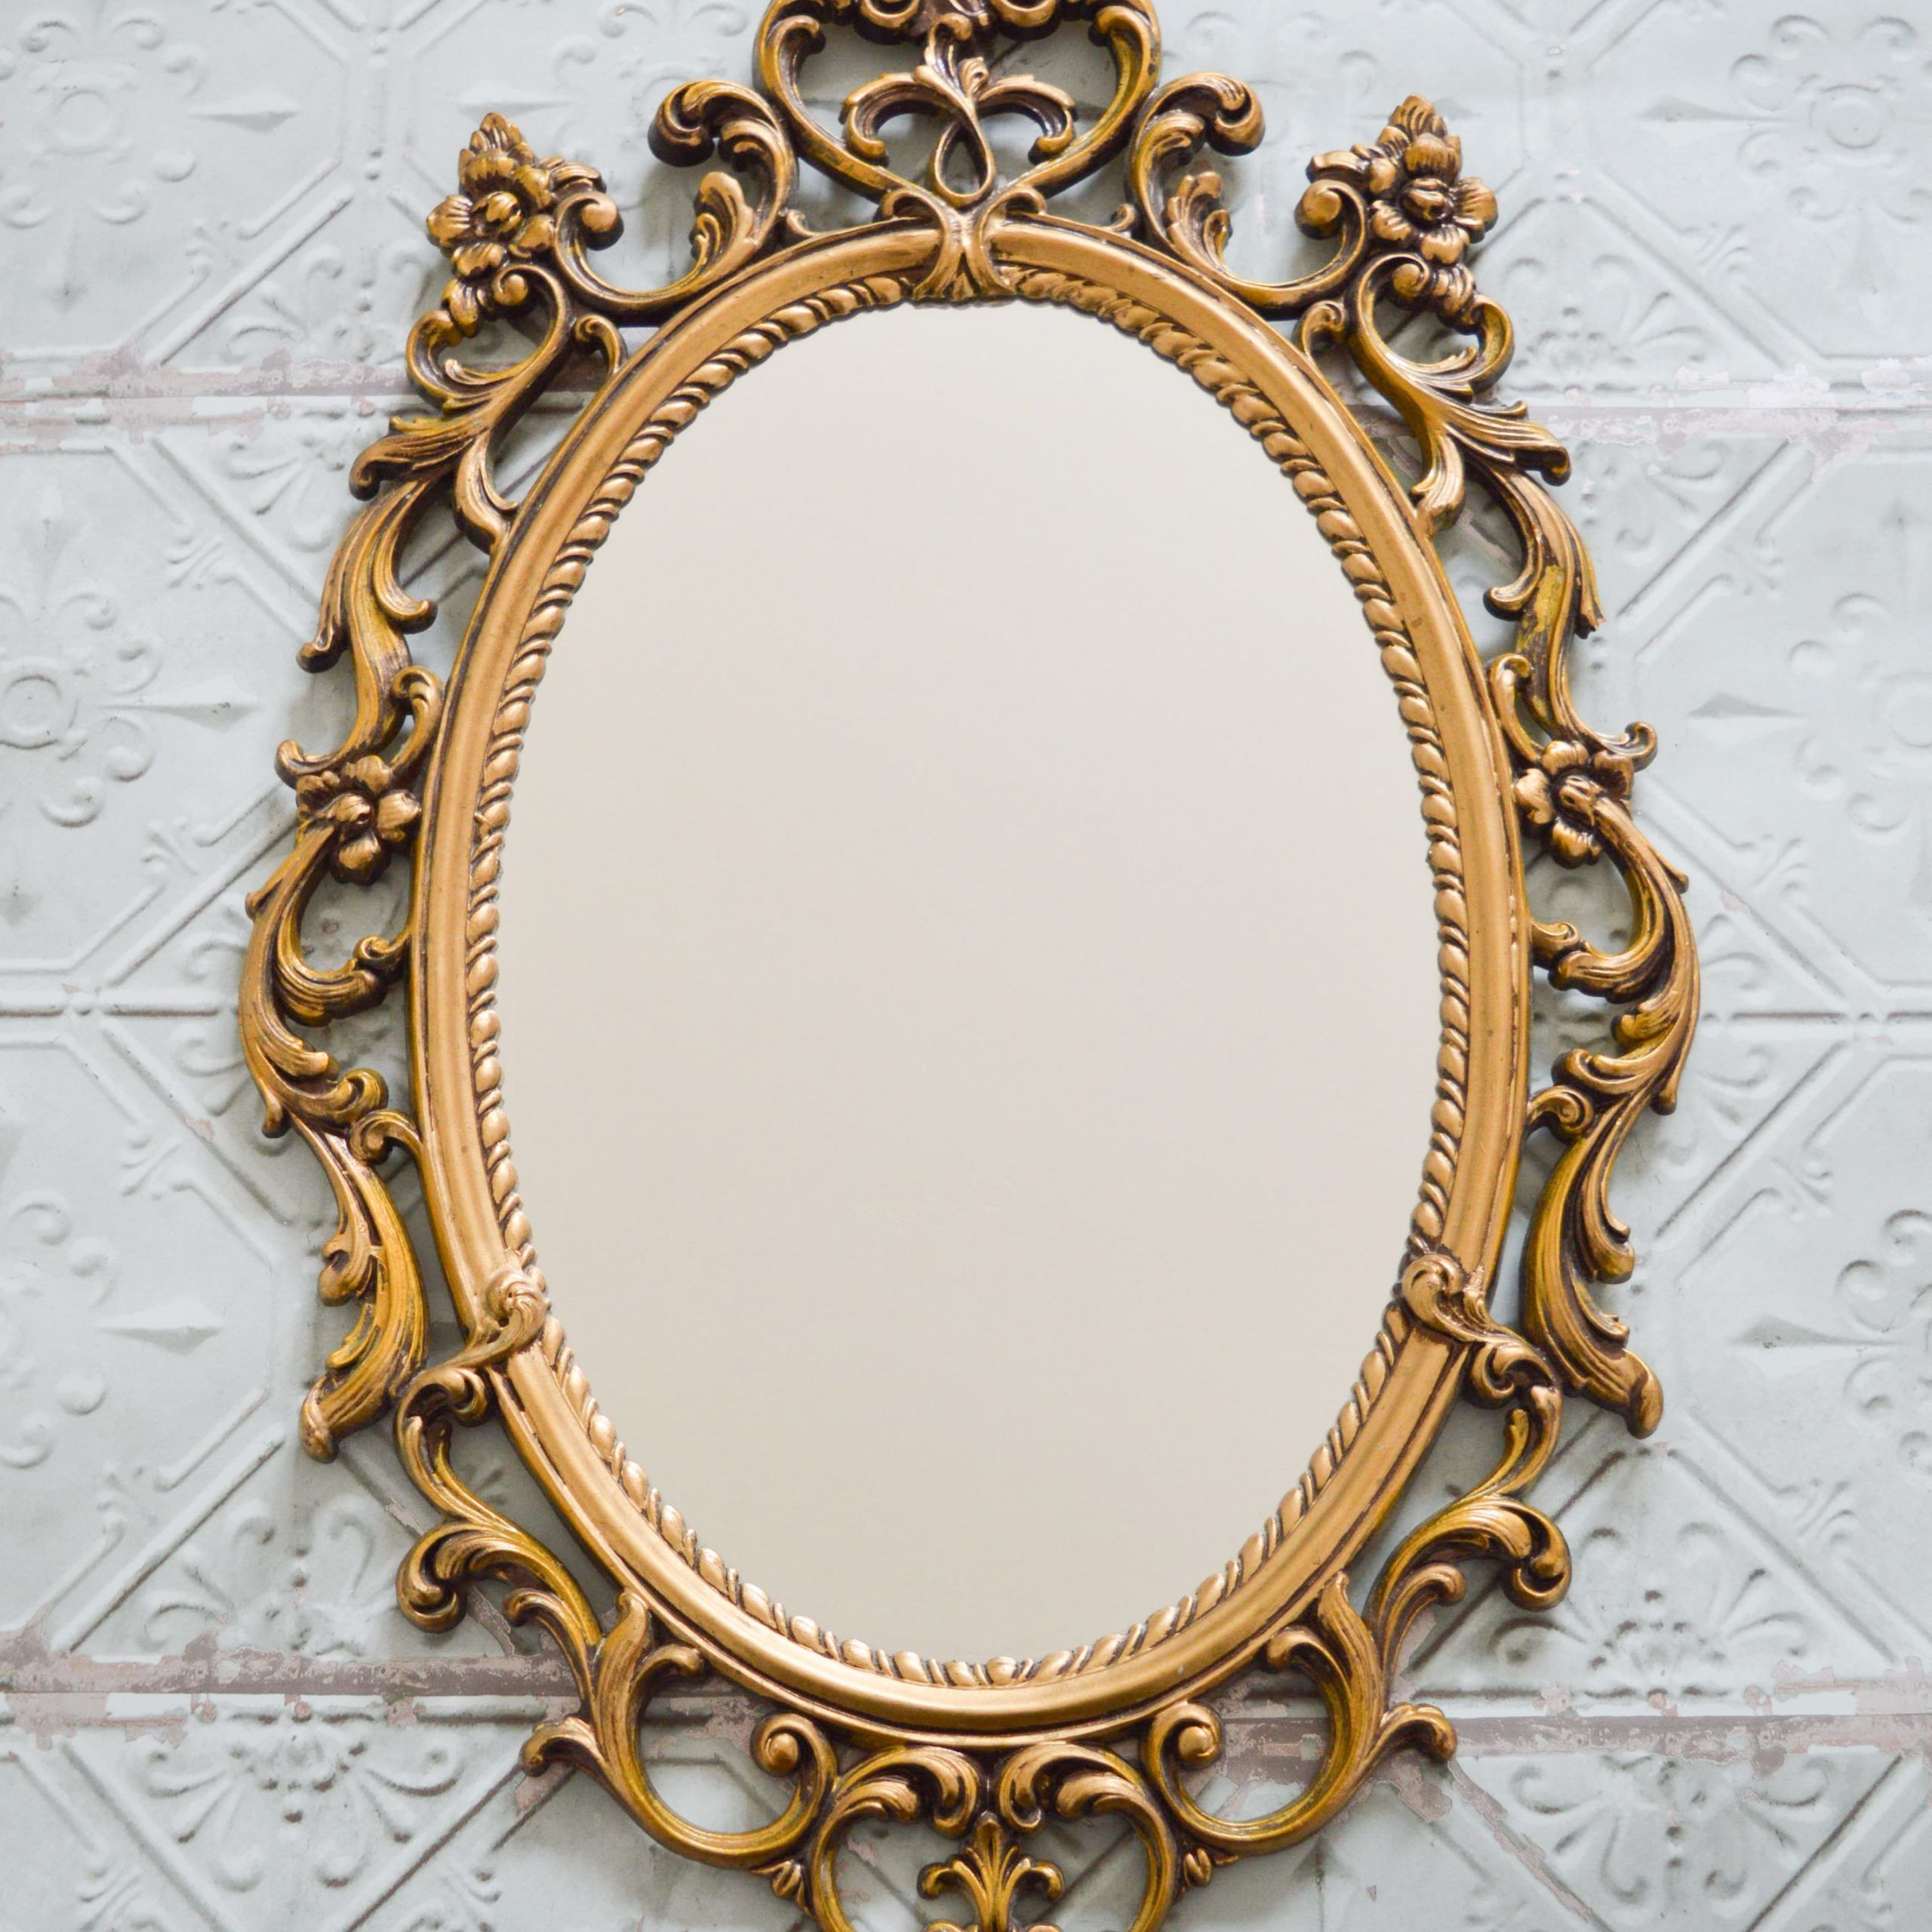 Large Rococo Mirror, Vintage French Baroque Gold Mirror, Oval Baroque Intended For Oval Metallic Accent Mirrors (View 1 of 15)